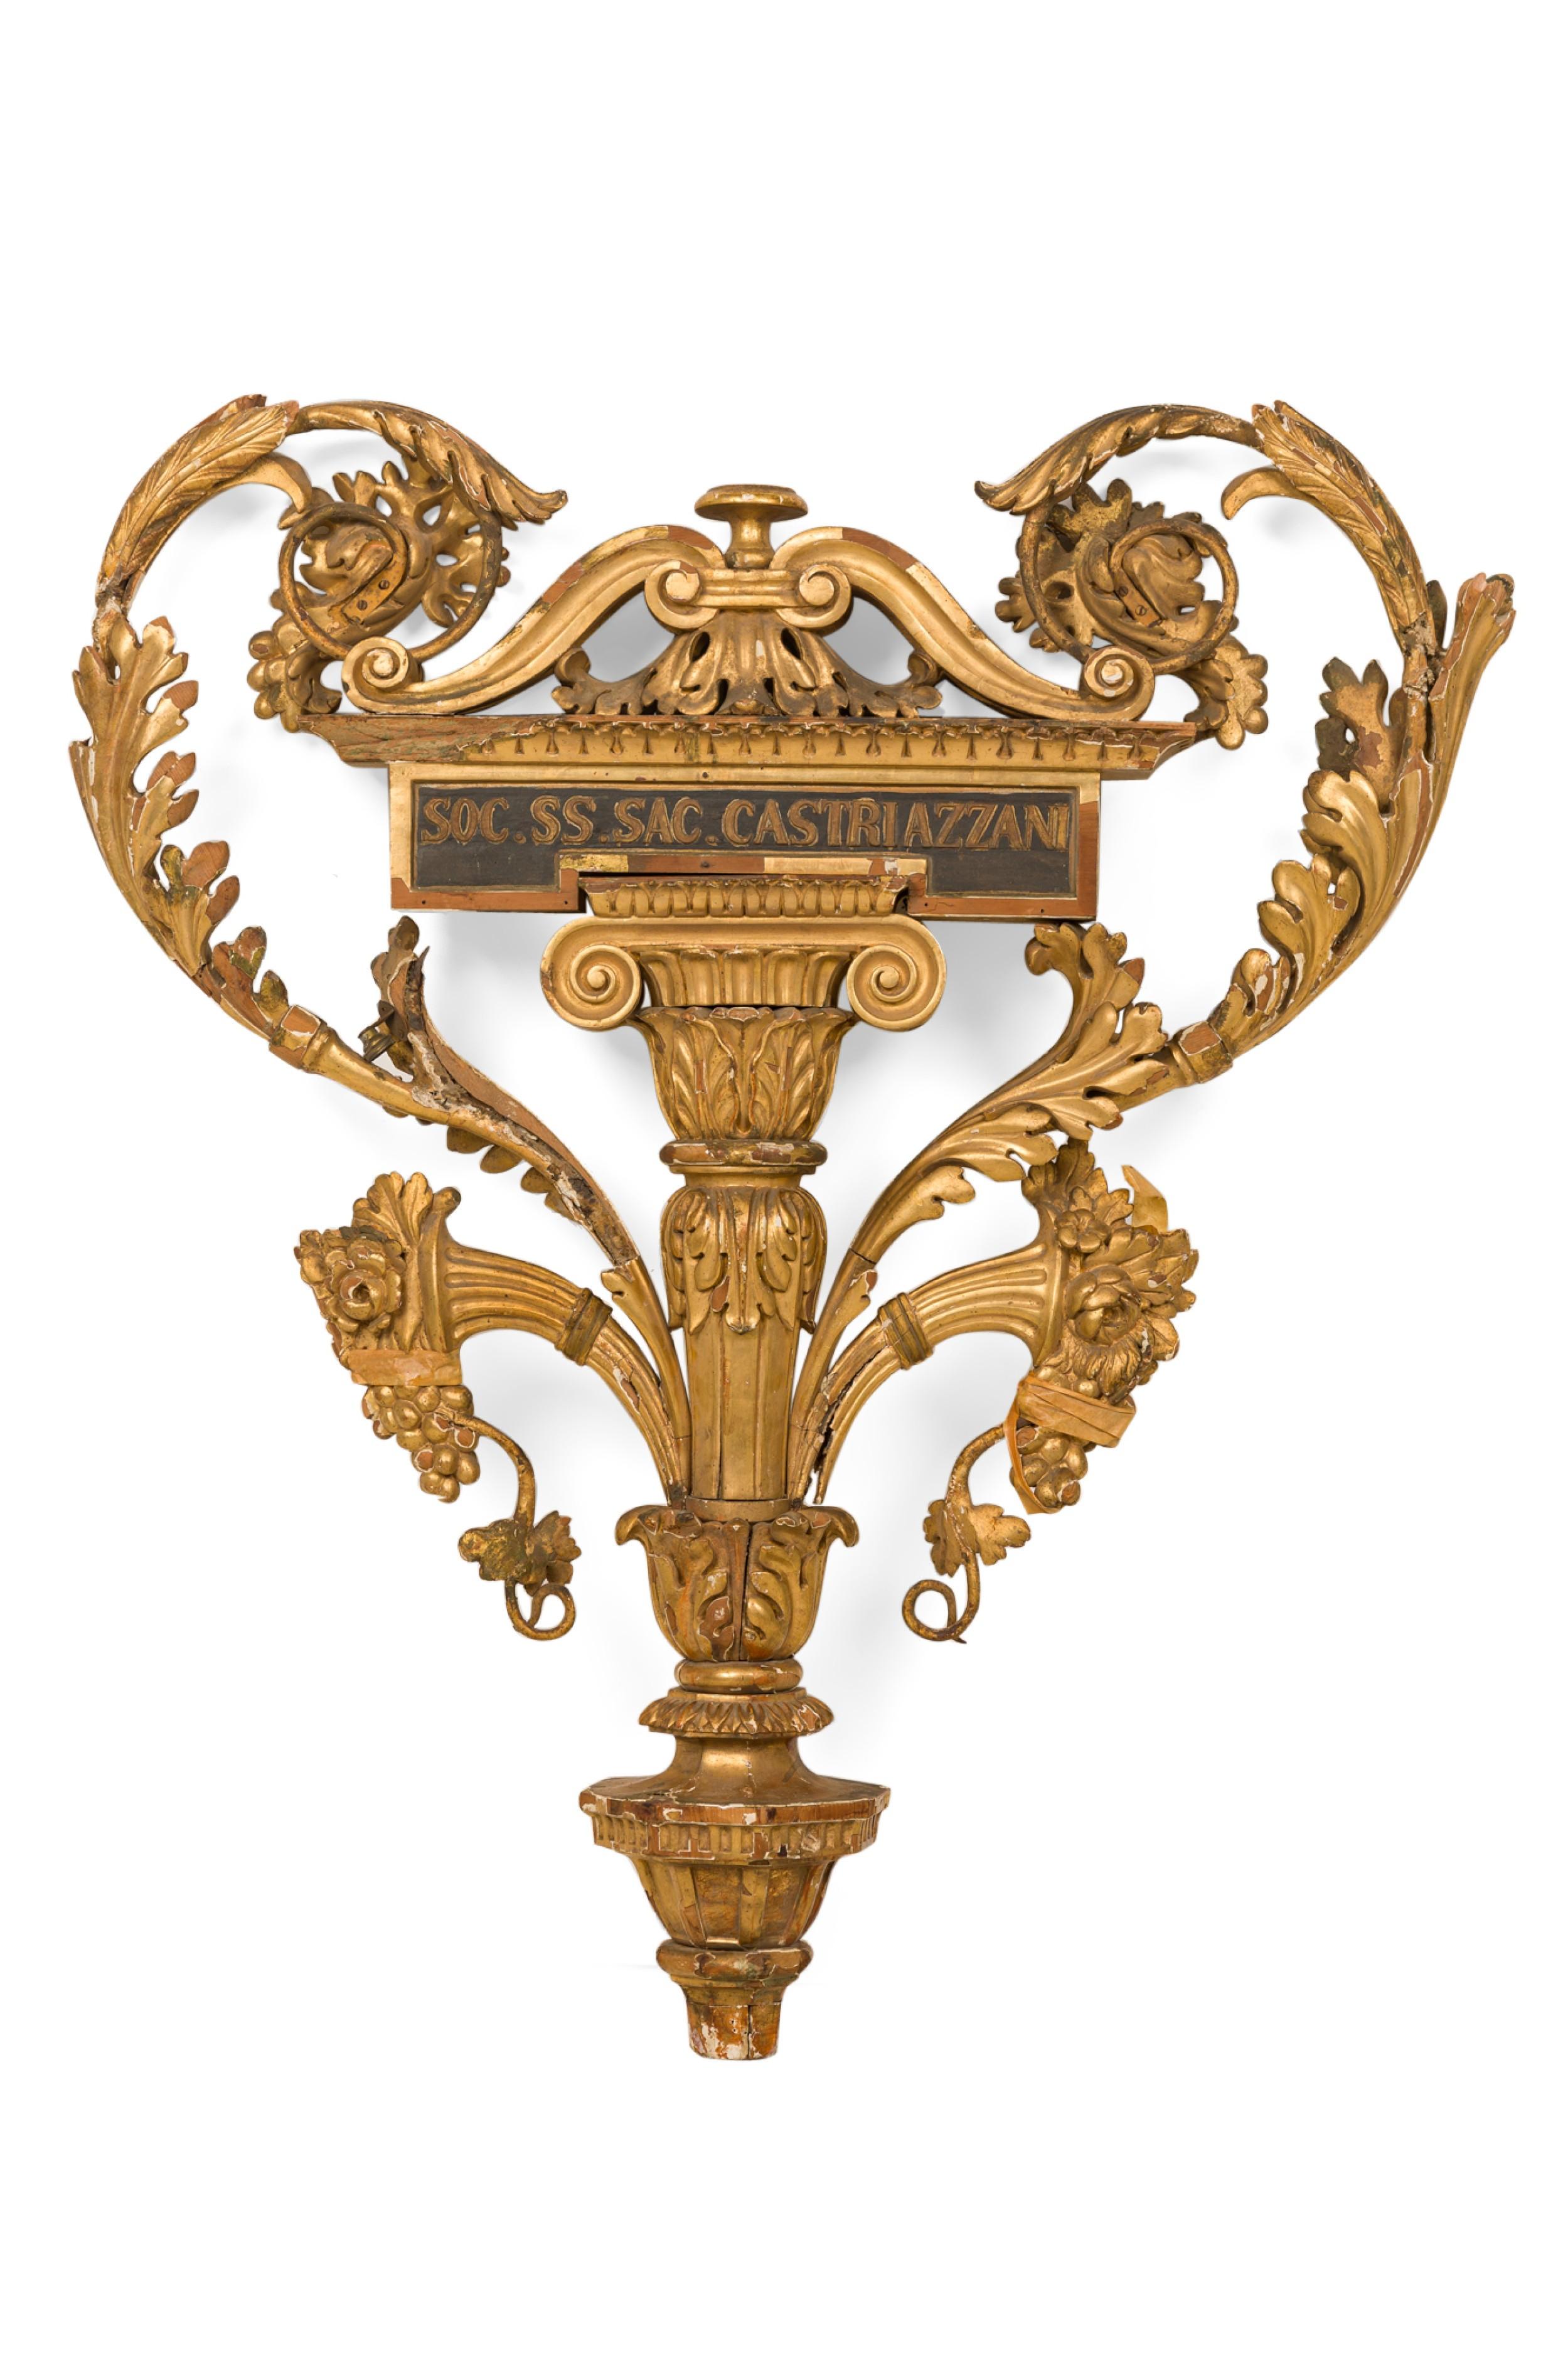 Italian Neoclassic (18th Century) gilt carved wood and metal wall plaque with a centered column and capital with an eminating scroll and cornicopia design
 

 Condition: Fair Condition with minor structural damages and losses to gilding